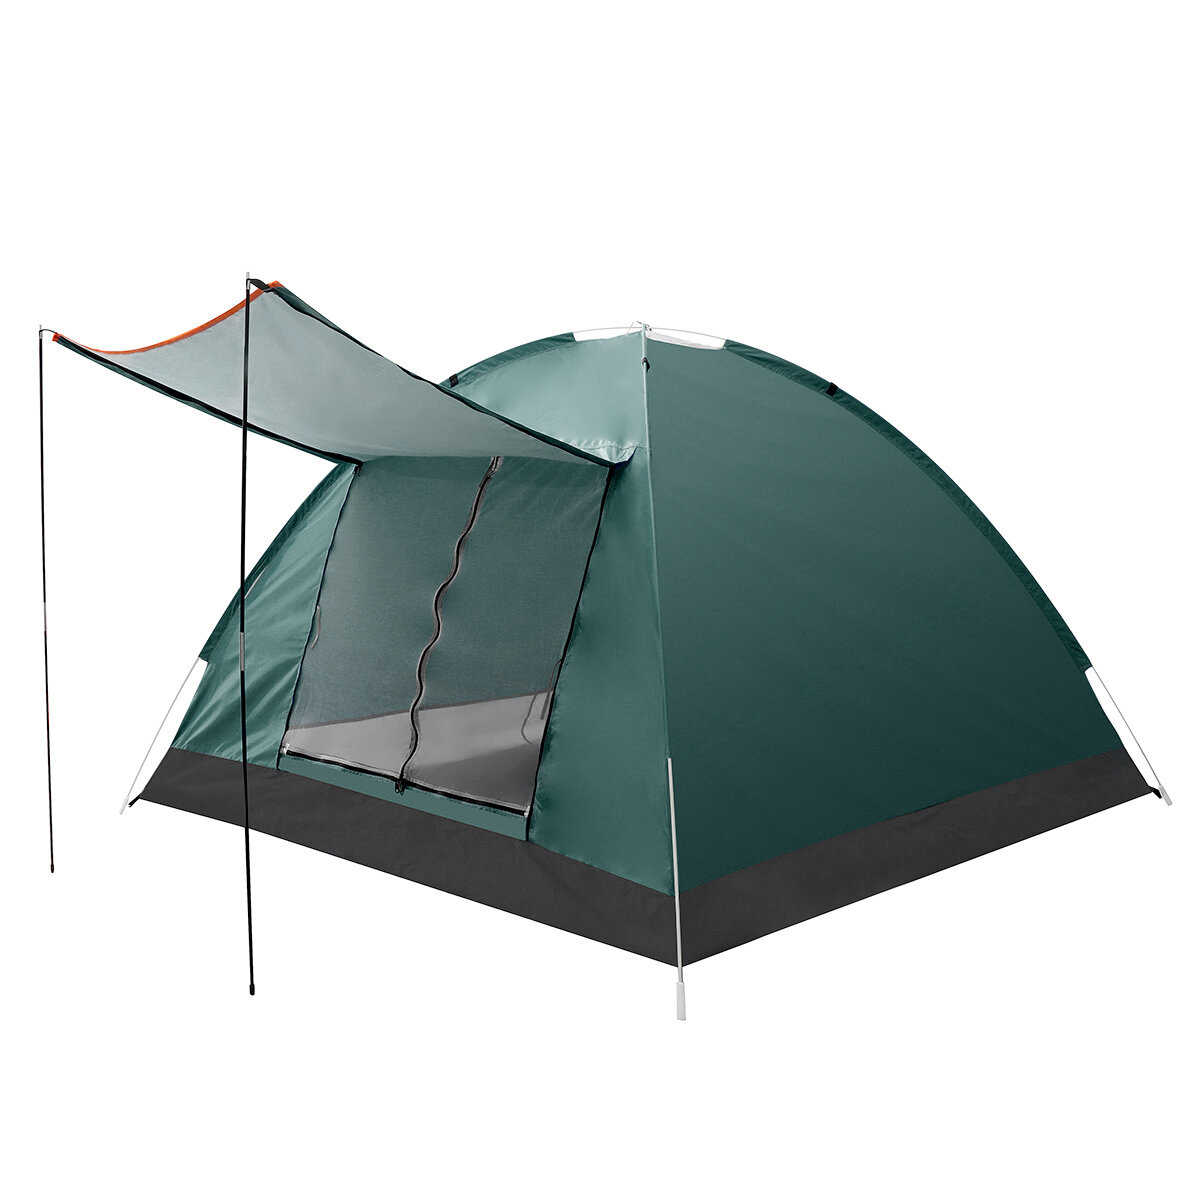 IPRee® 3-4 Person Double Layer Camping Tent With Double Door Outdoor Waterproof Awning Tent 125x200x200cm for Fishing Camping Party